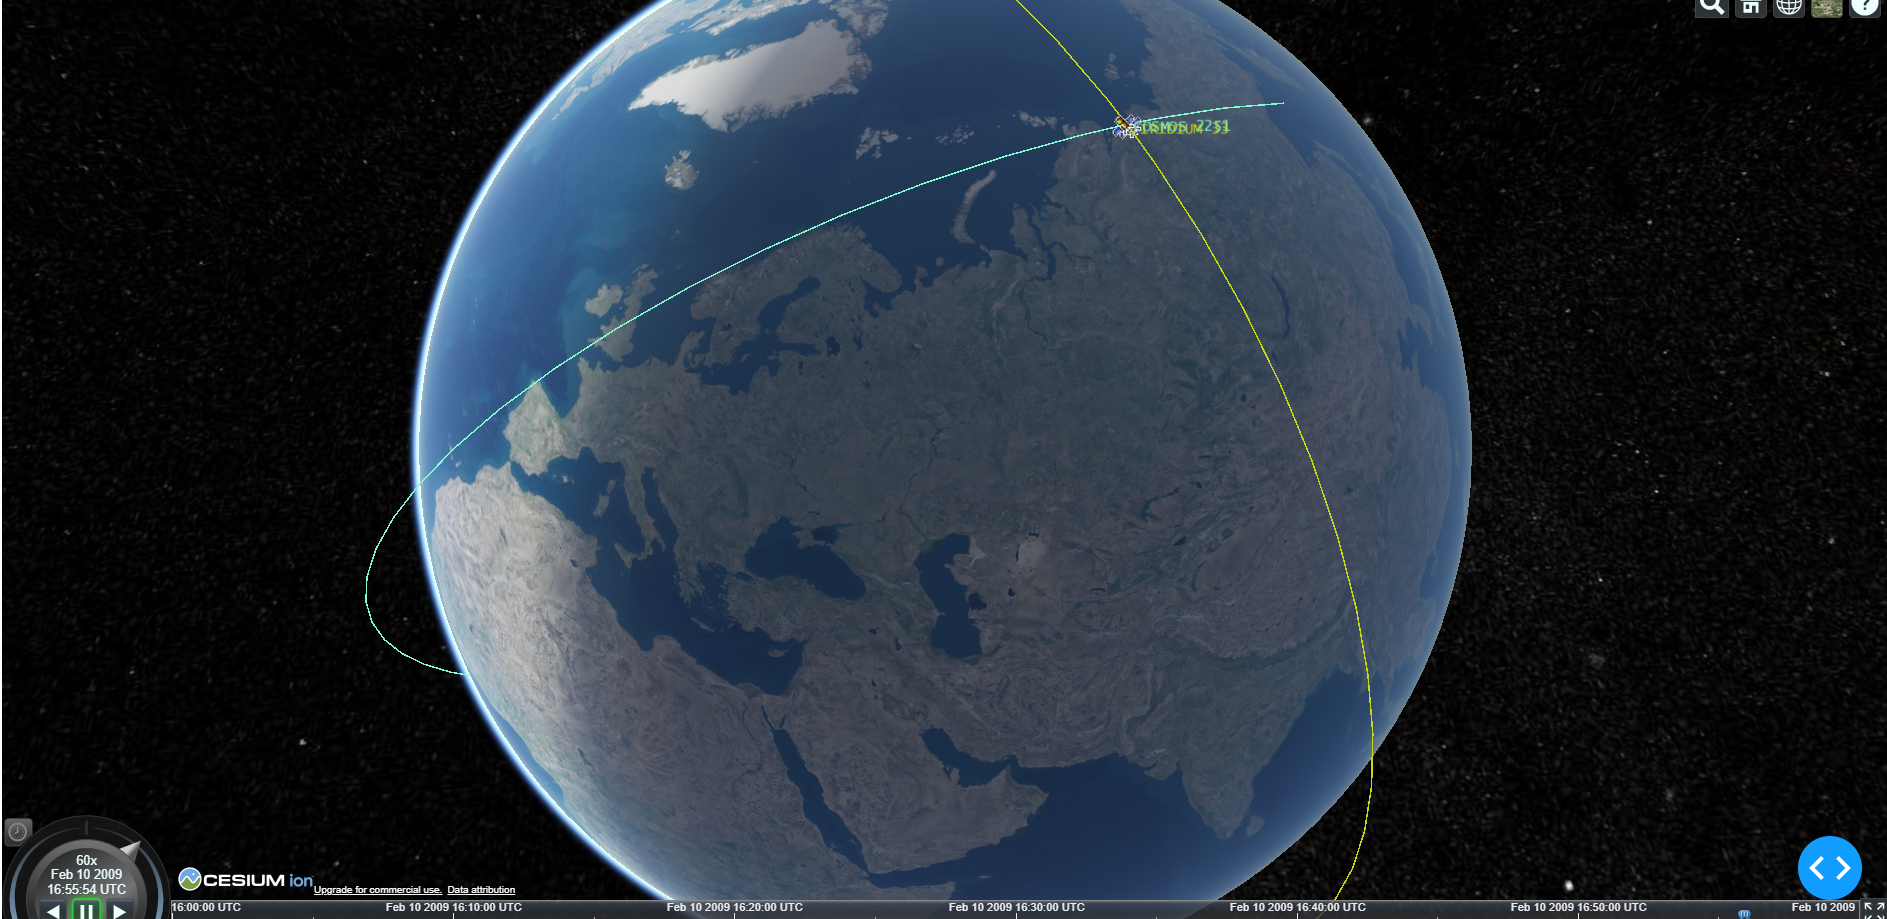 Two satellites intersecting